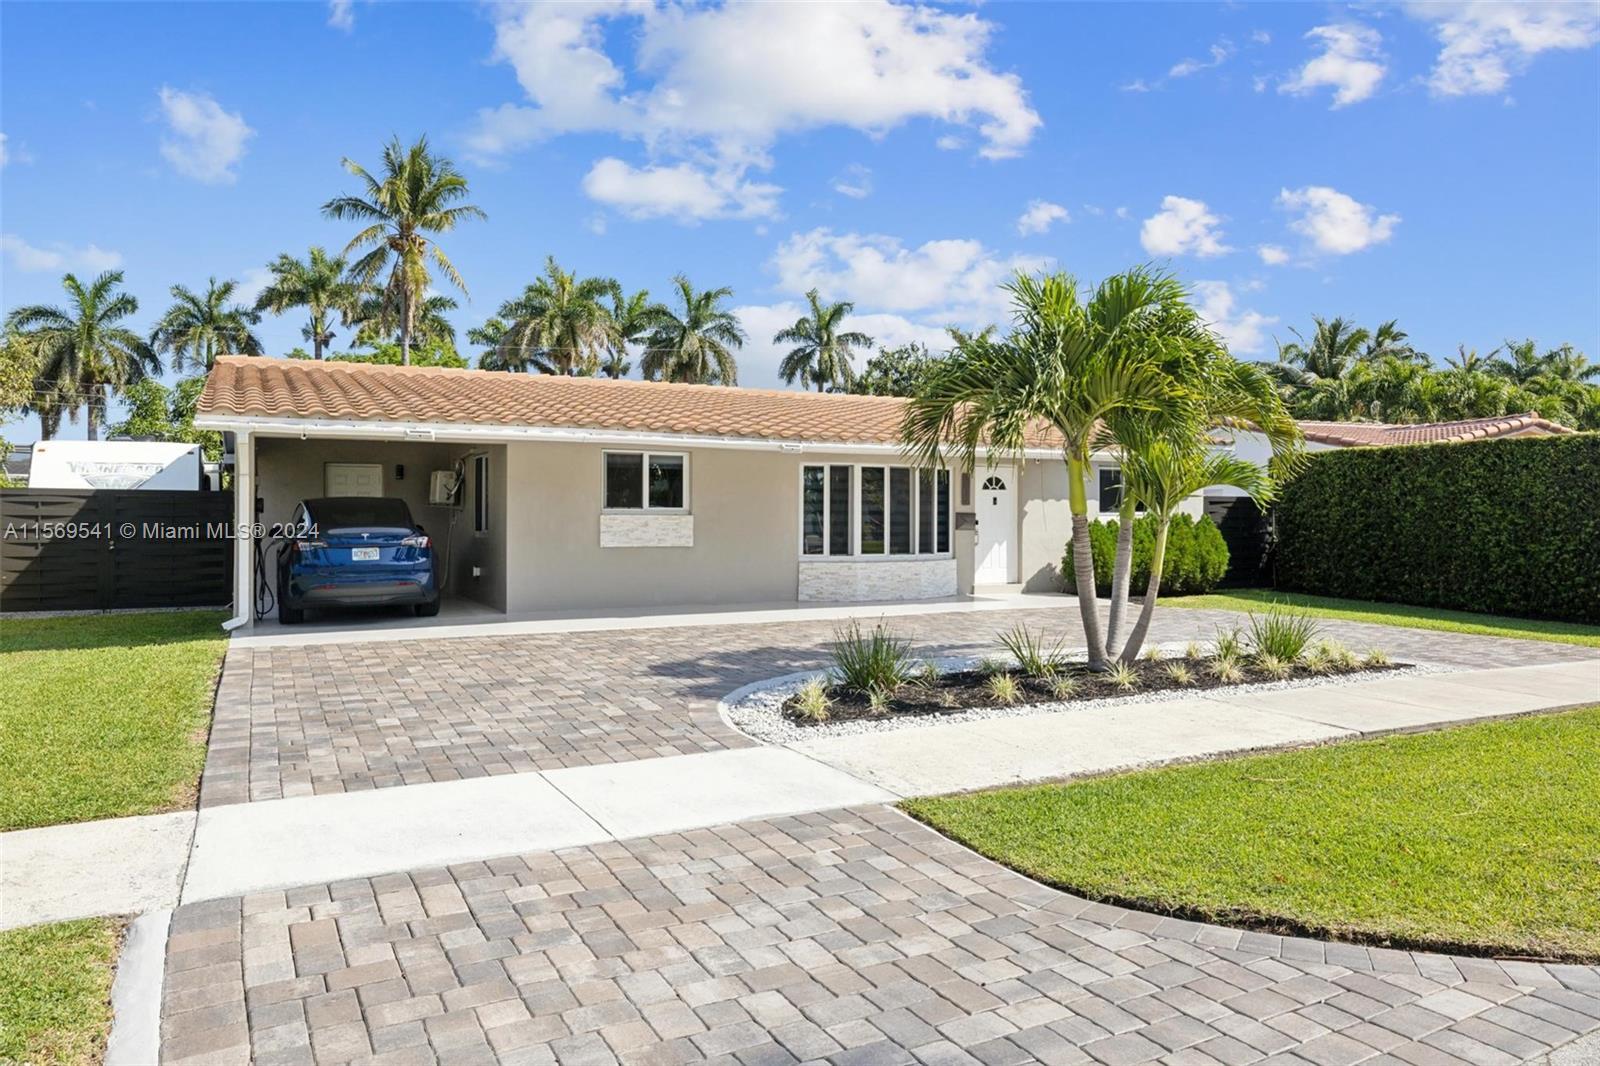 Welcome to your dream home in Hallandale Beach! This 4/3 gem boasts recent upgrades including roof, 